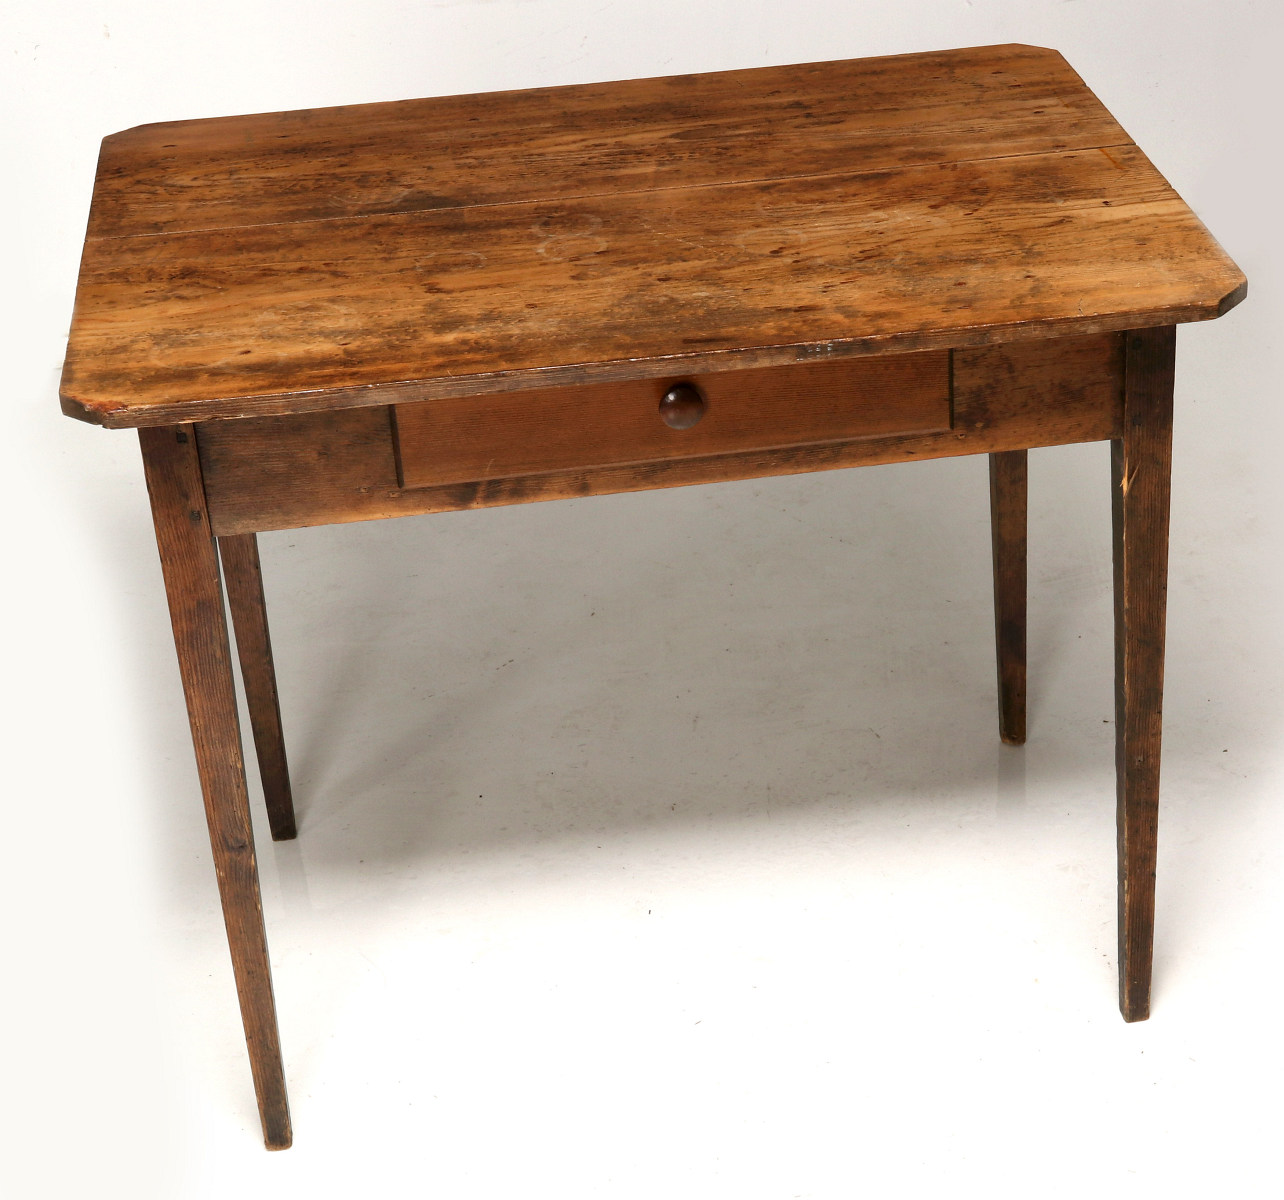 A 19TH CENTURY AMERICAN COUNTRY PINE STAND TABLE